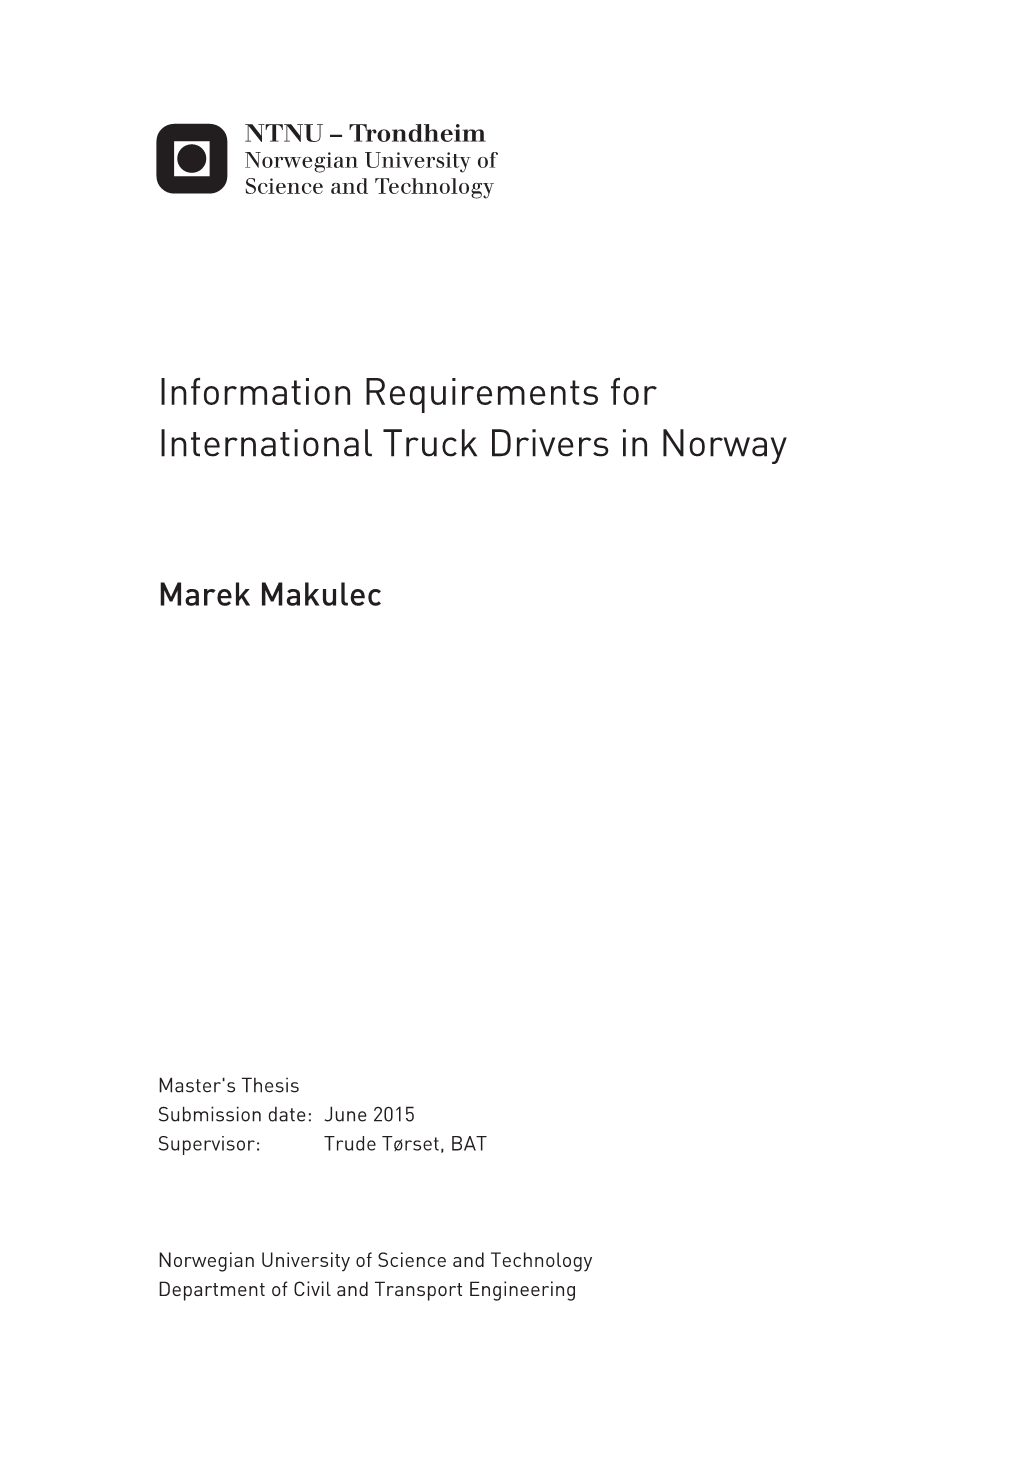 Information Requirements for International Truck Drivers in Norway